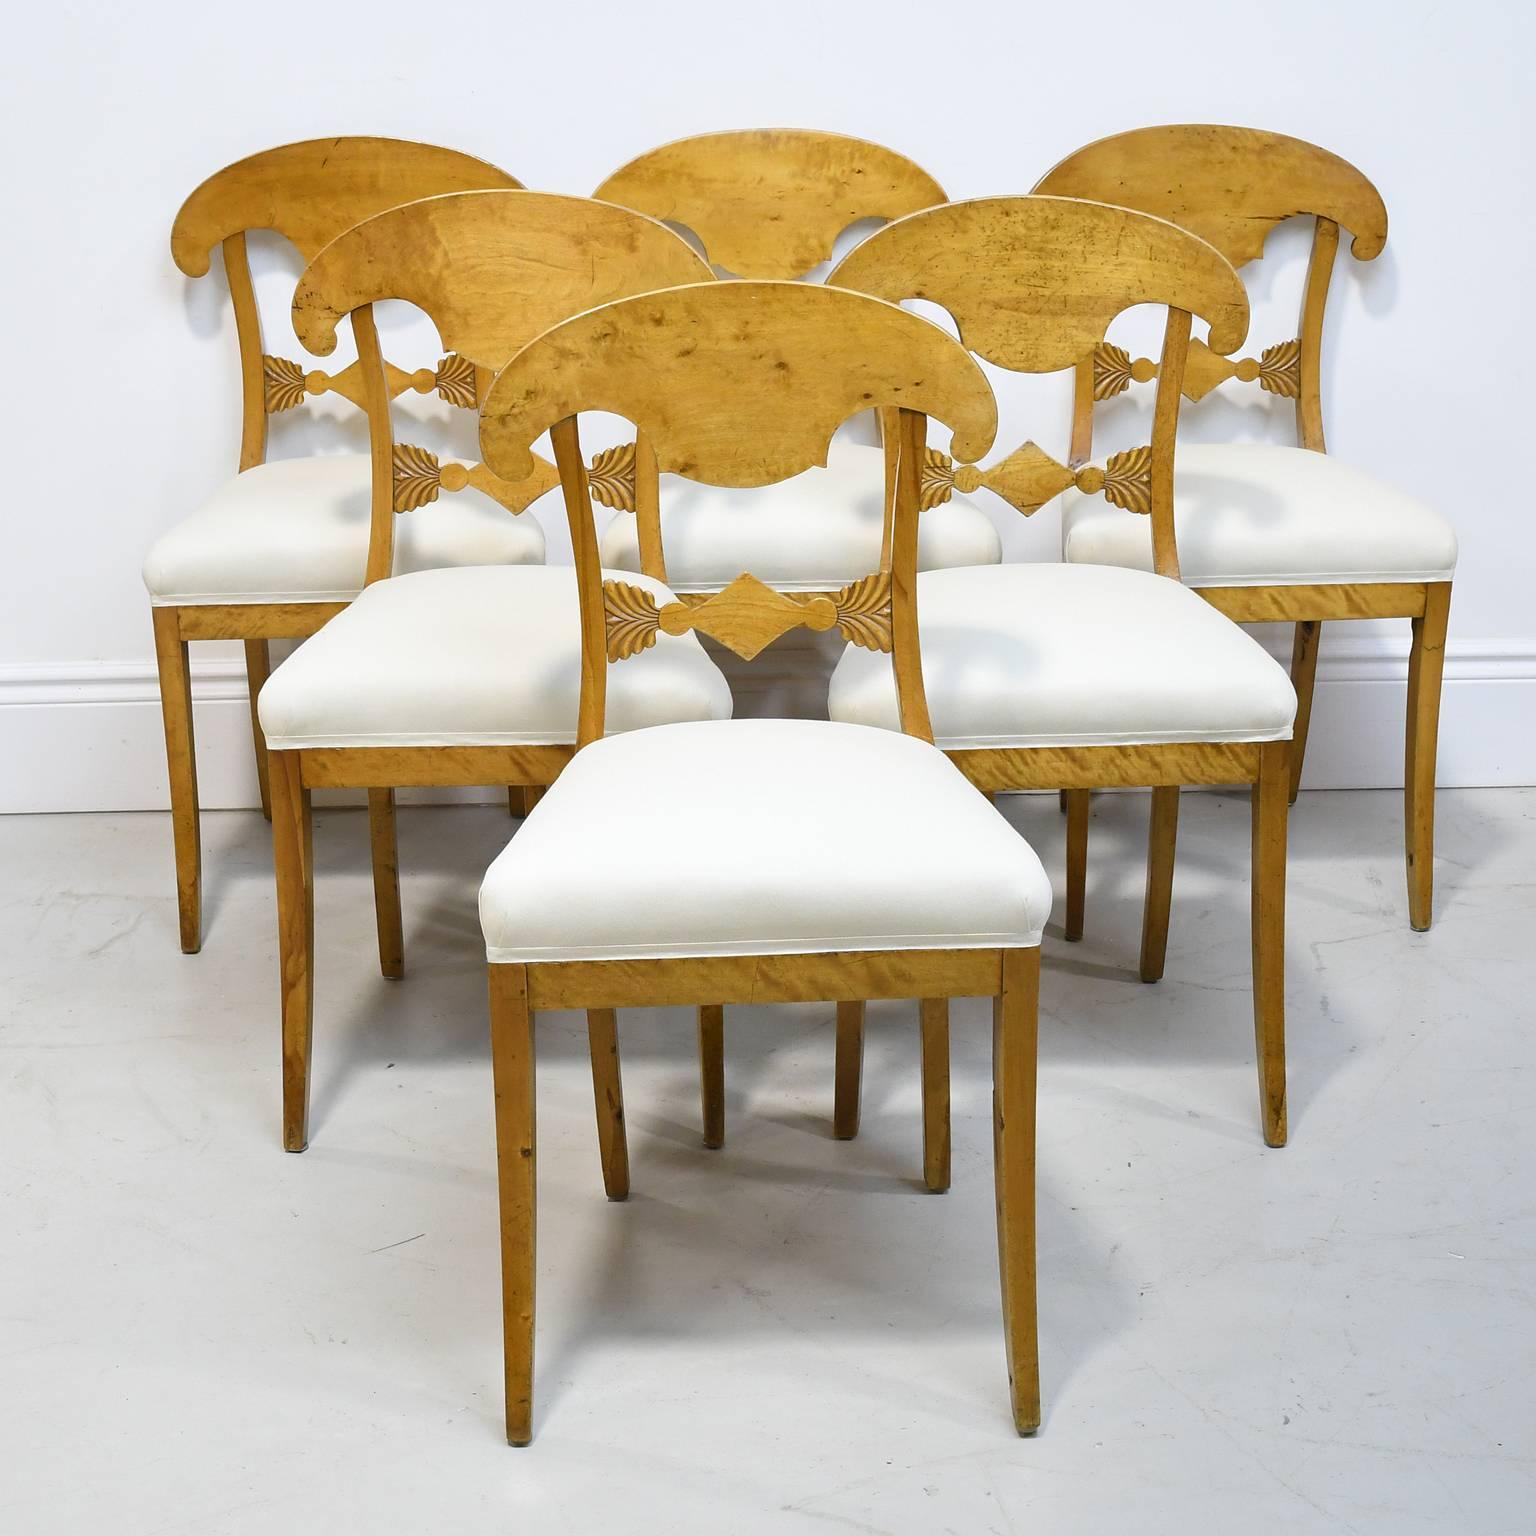 A set of six early Swedish Biedermeier dining chairs from the Karl Johan era with carved crest rail in the shape of a soldier's hat, and a carved diamond flanked by stylized foliage on the lower back rail, tapered front legs and saber back legs, and